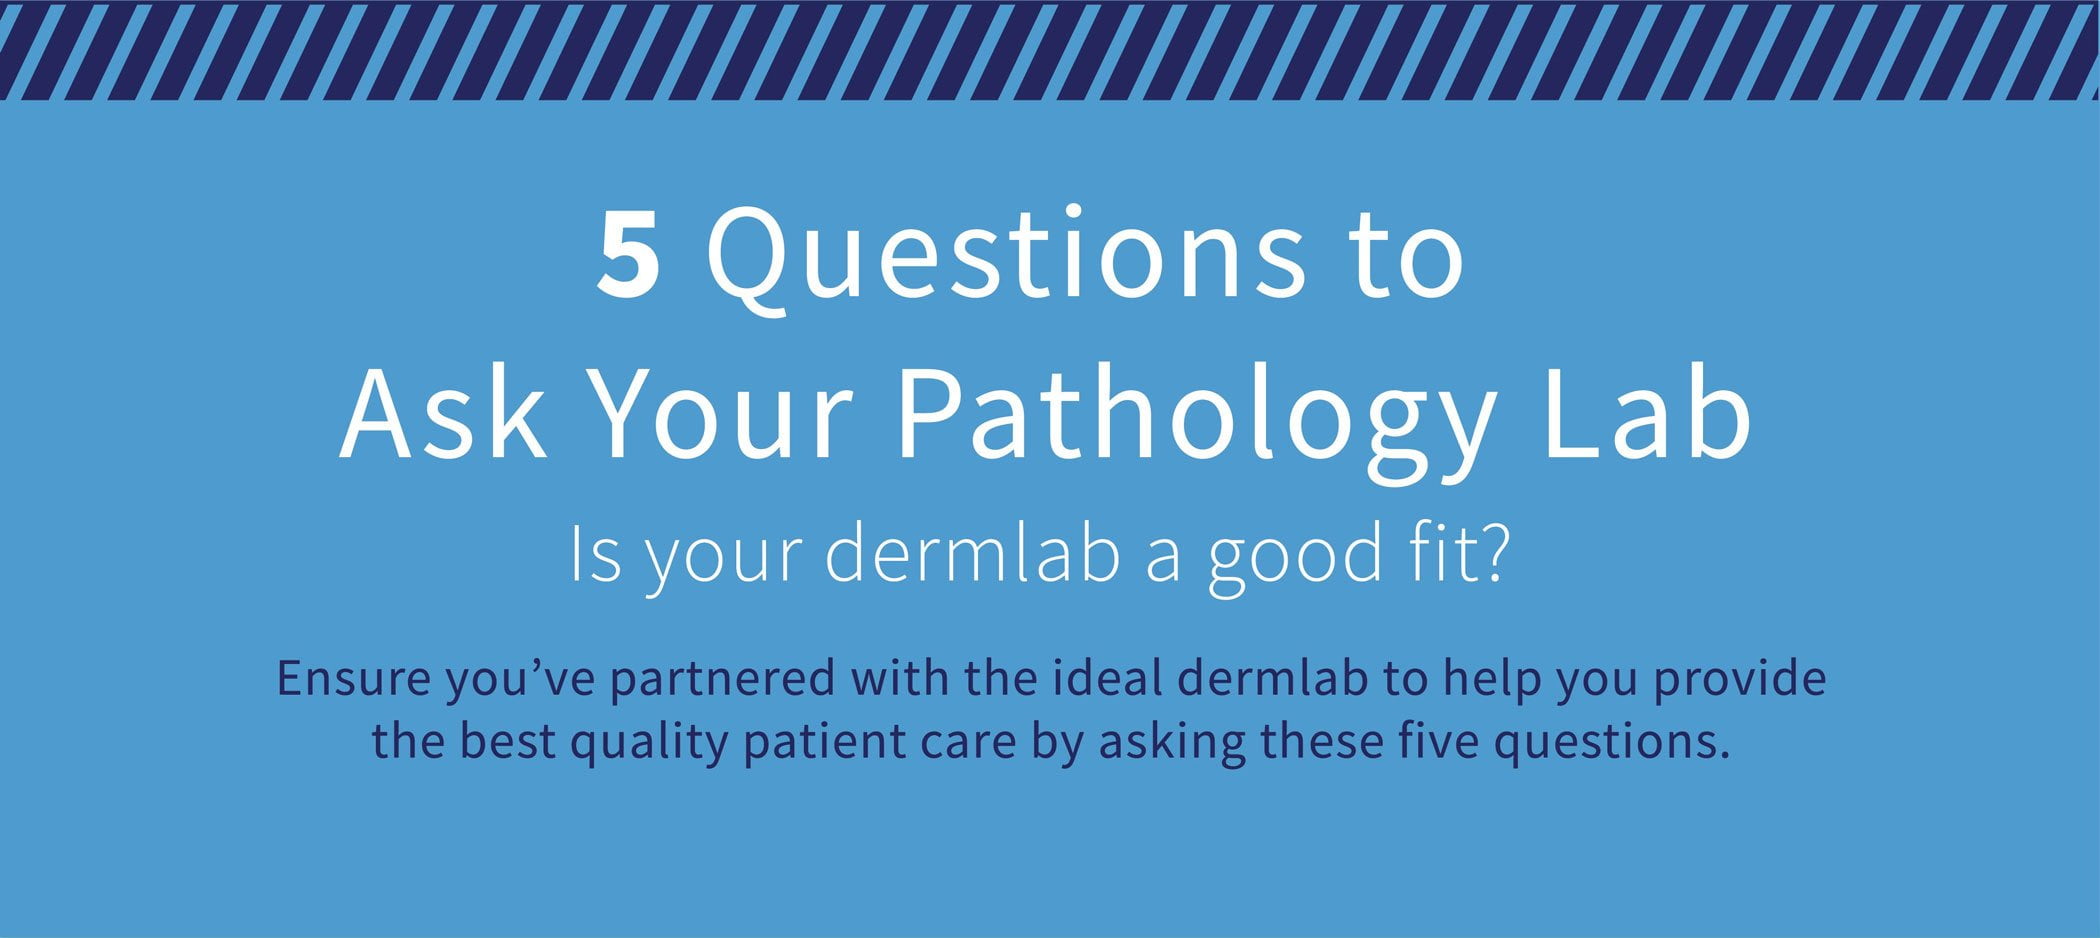 5 questions to ask your pathology lab